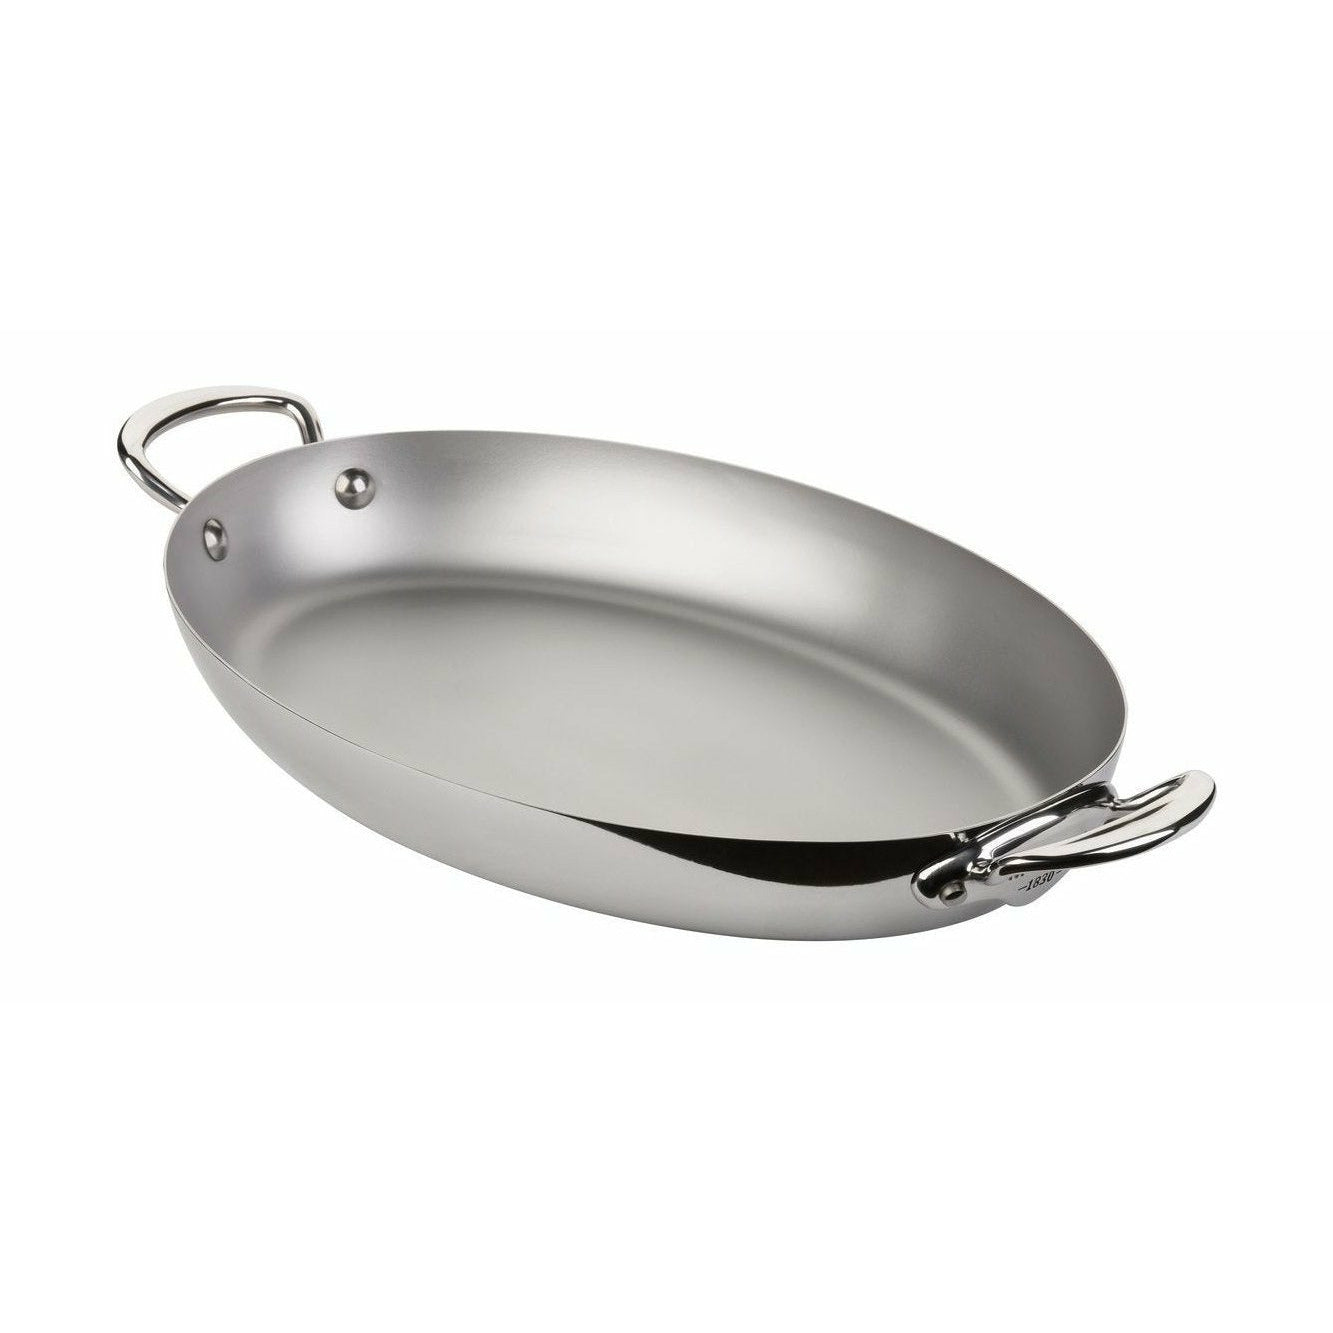 Mauviel Cook Style Pande With 2 Handles Oval, ø 30 Cm